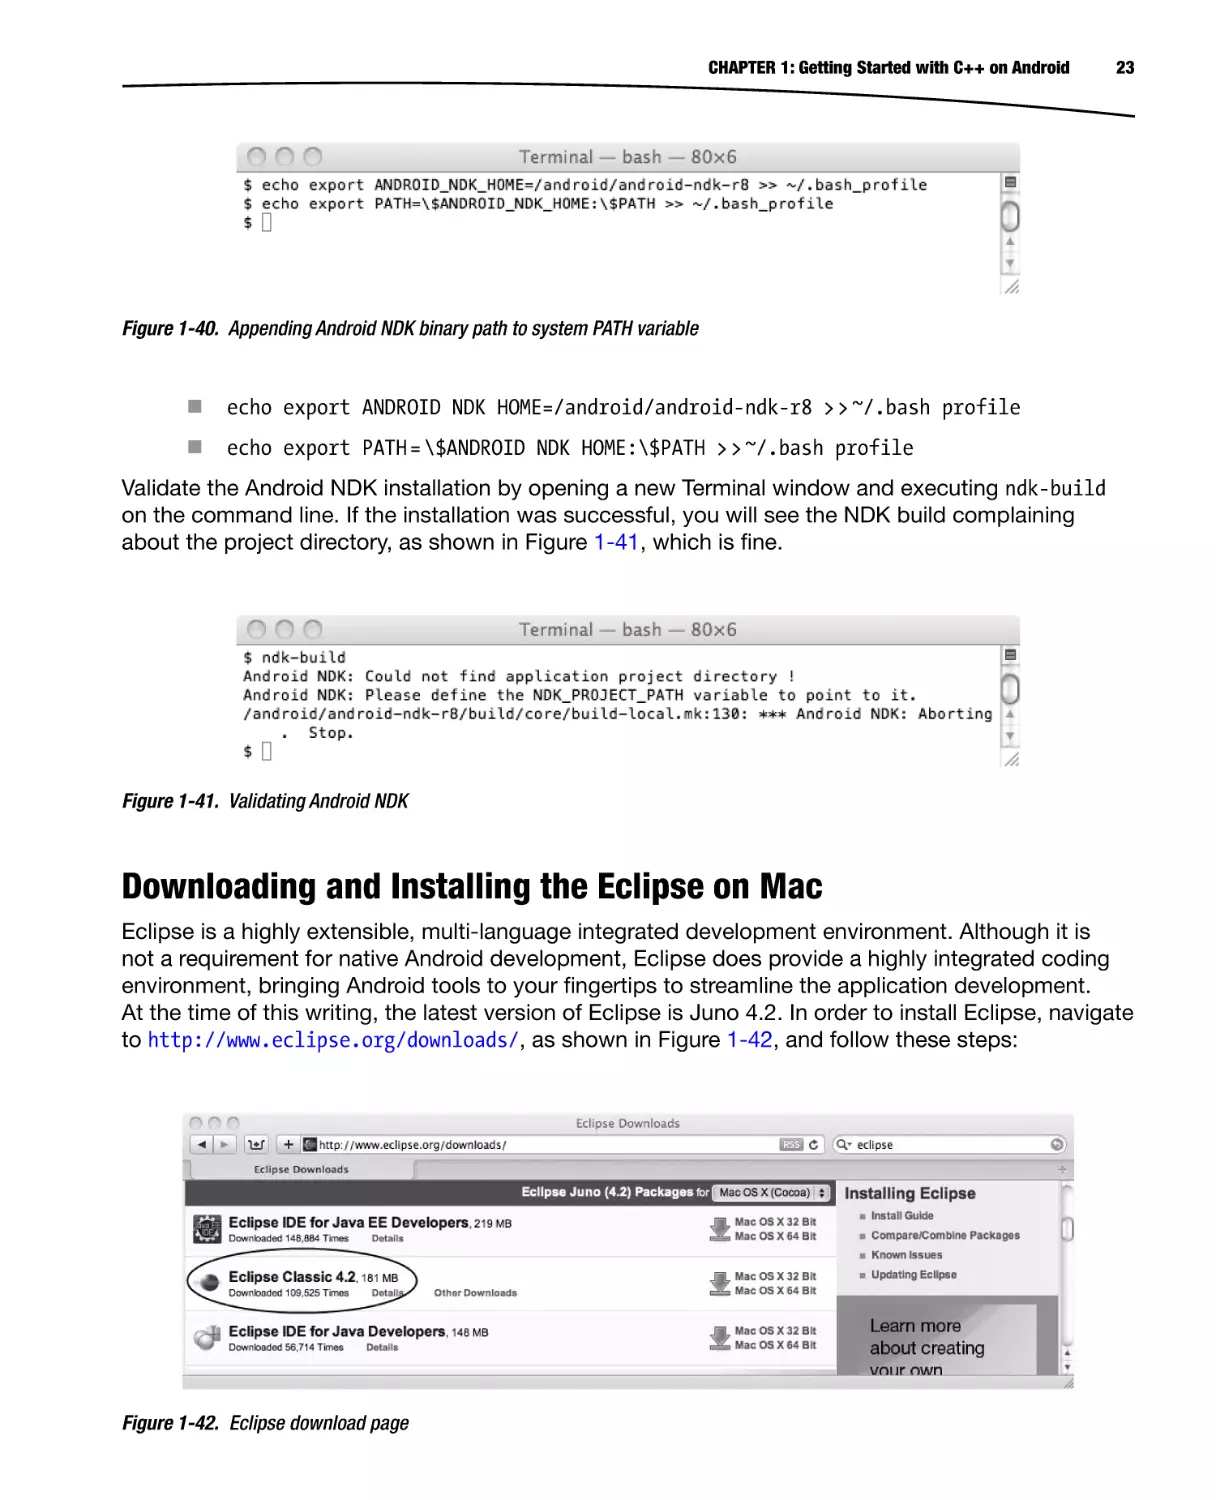 Downloading and Installing the Eclipse on Mac